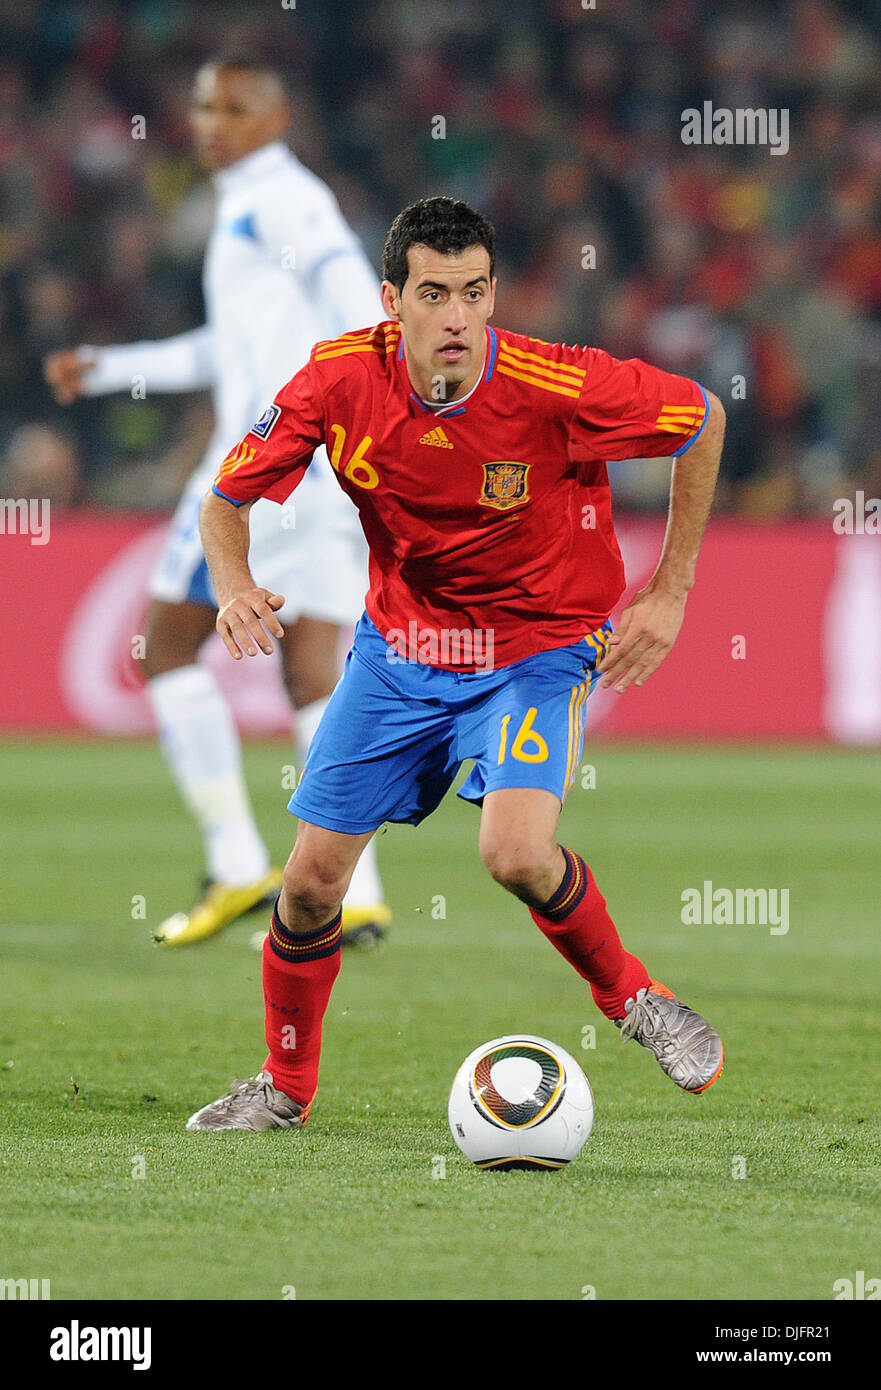 June 21, 2010 - Johannesburg, South Africa - Sergio Busquets of Spain in action during the 2010 FIFA World Cup soccer match between Spain and Honduras at Ellis Park Stadium on June 21, 2010 in Johannesburg, South Africa. (Credit Image: © Luca Ghidoni/ZUMApress.com) Stock Photo